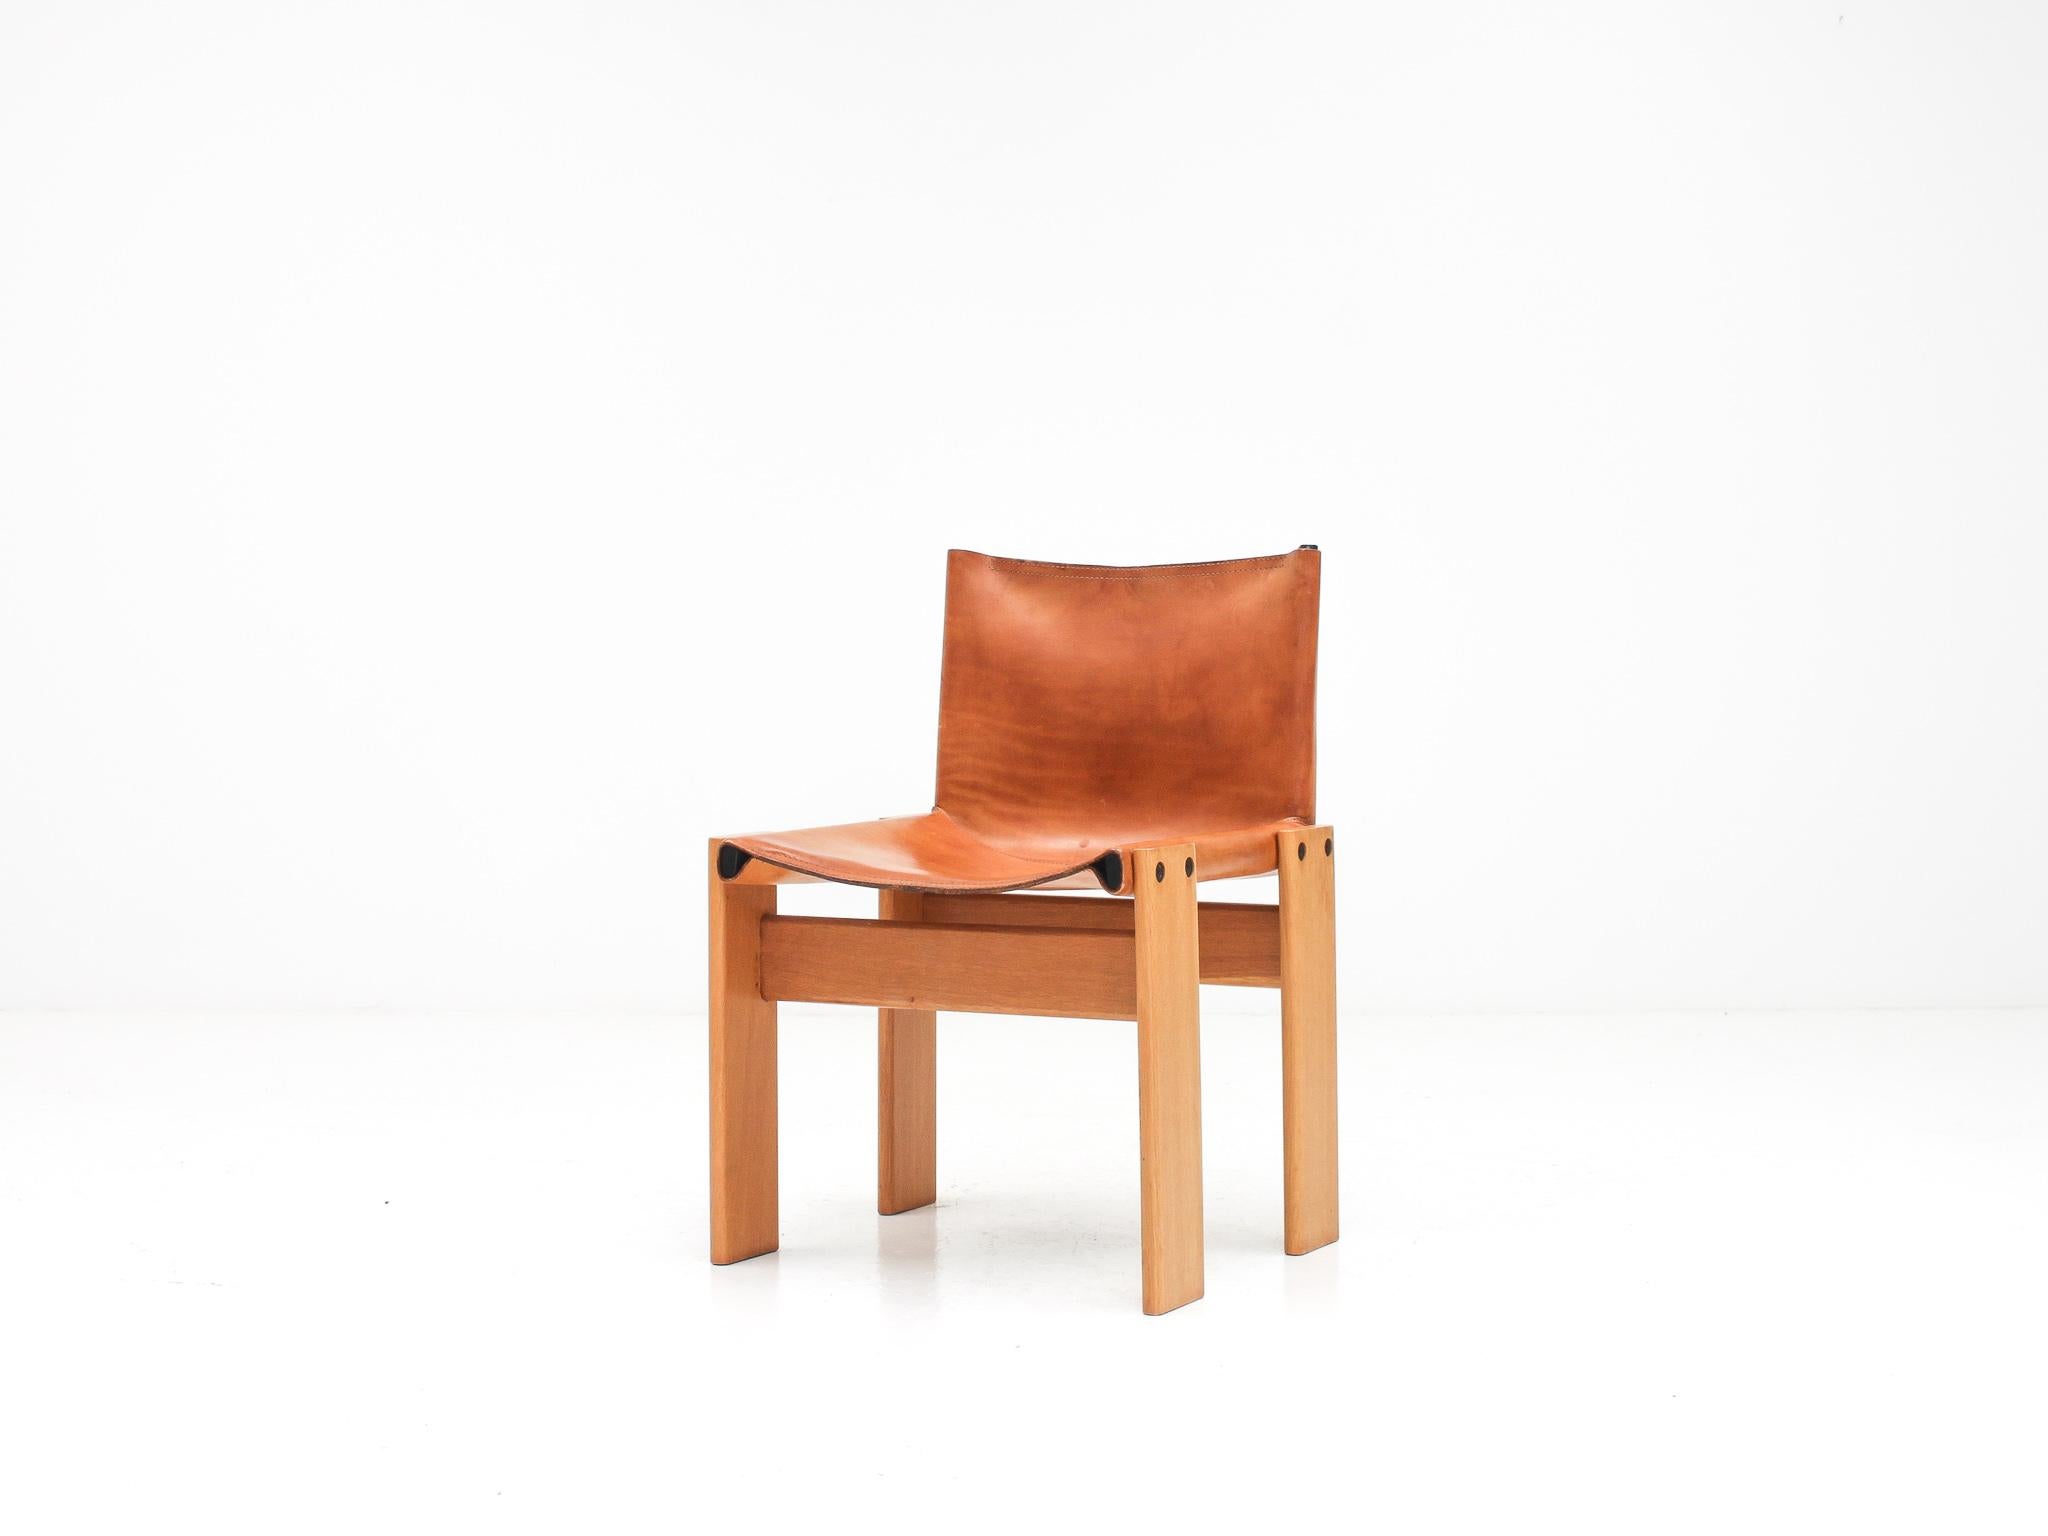 A single 'Monk' chair by Italian award-winning designer couple Afra & Tobia Scarpa. 

Patinated Ash wood and thick original saddle leather, the design is high-quality, minimal and solid. Manufactured by Molteni, Italy, 1974. 

A stunning piece